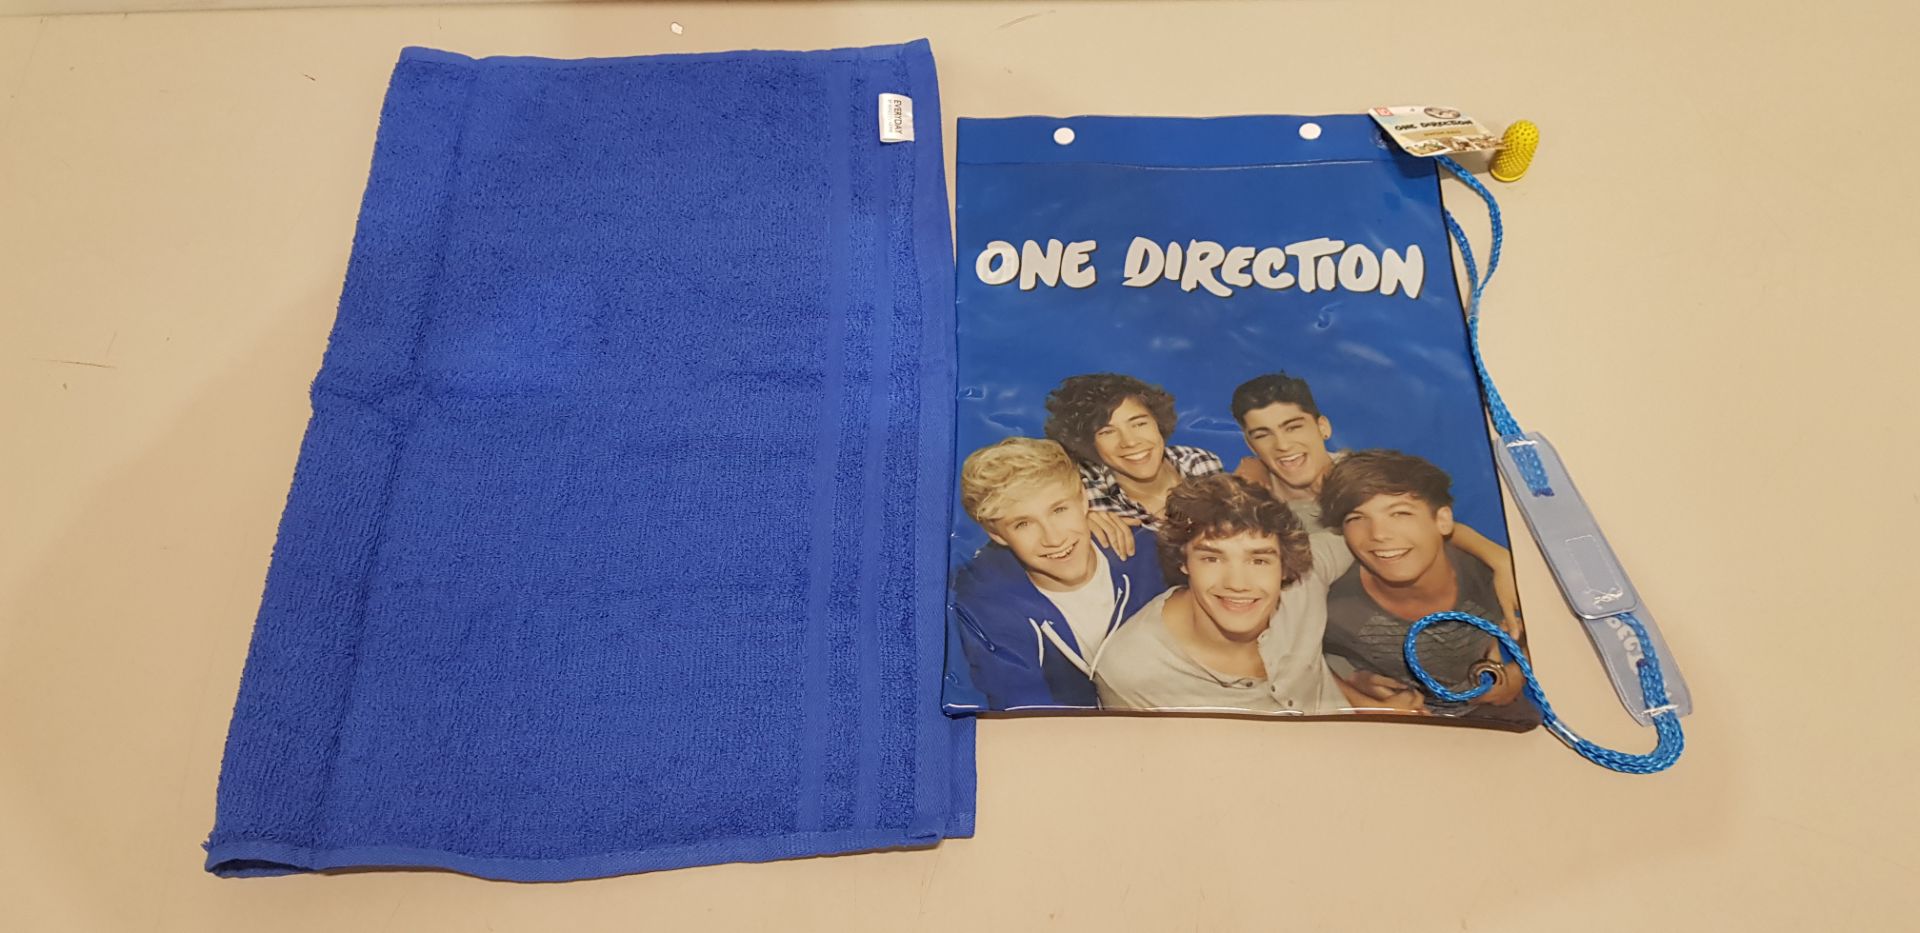 150 X BRAND NEW ONE DIRECTION SET CONTAINING ONE DIRECTION SWIMMING BAG AND 1X TOWEL SIZE 70CM X